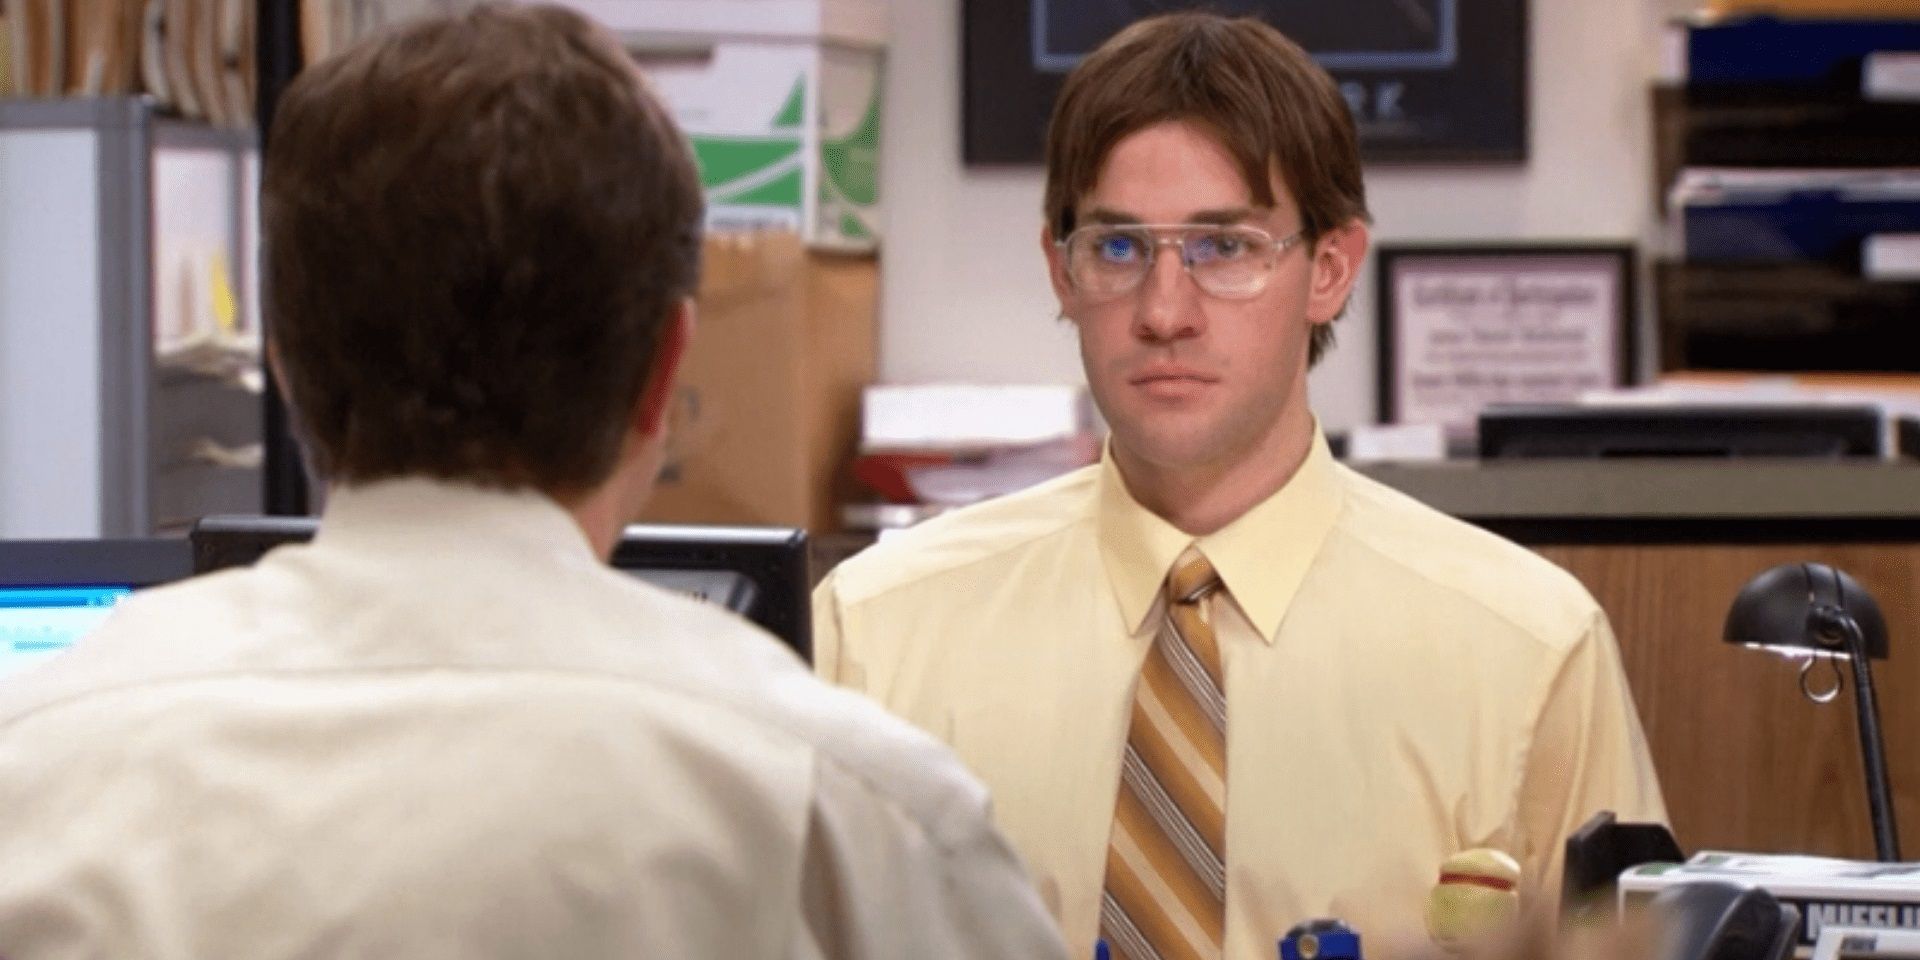 Jim dressed as Dwight in The Office.